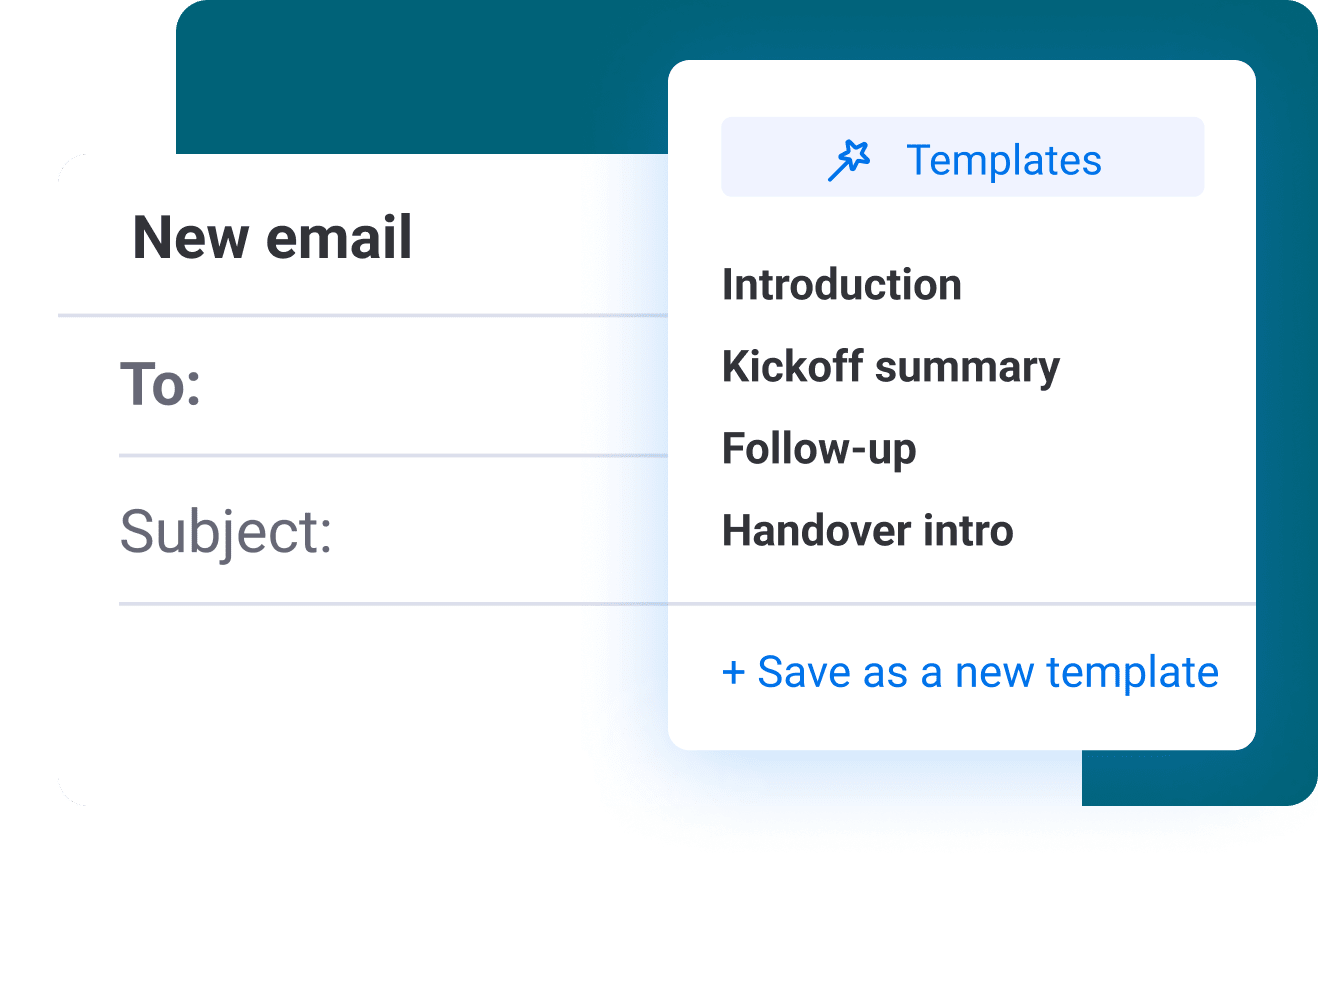 Email templates